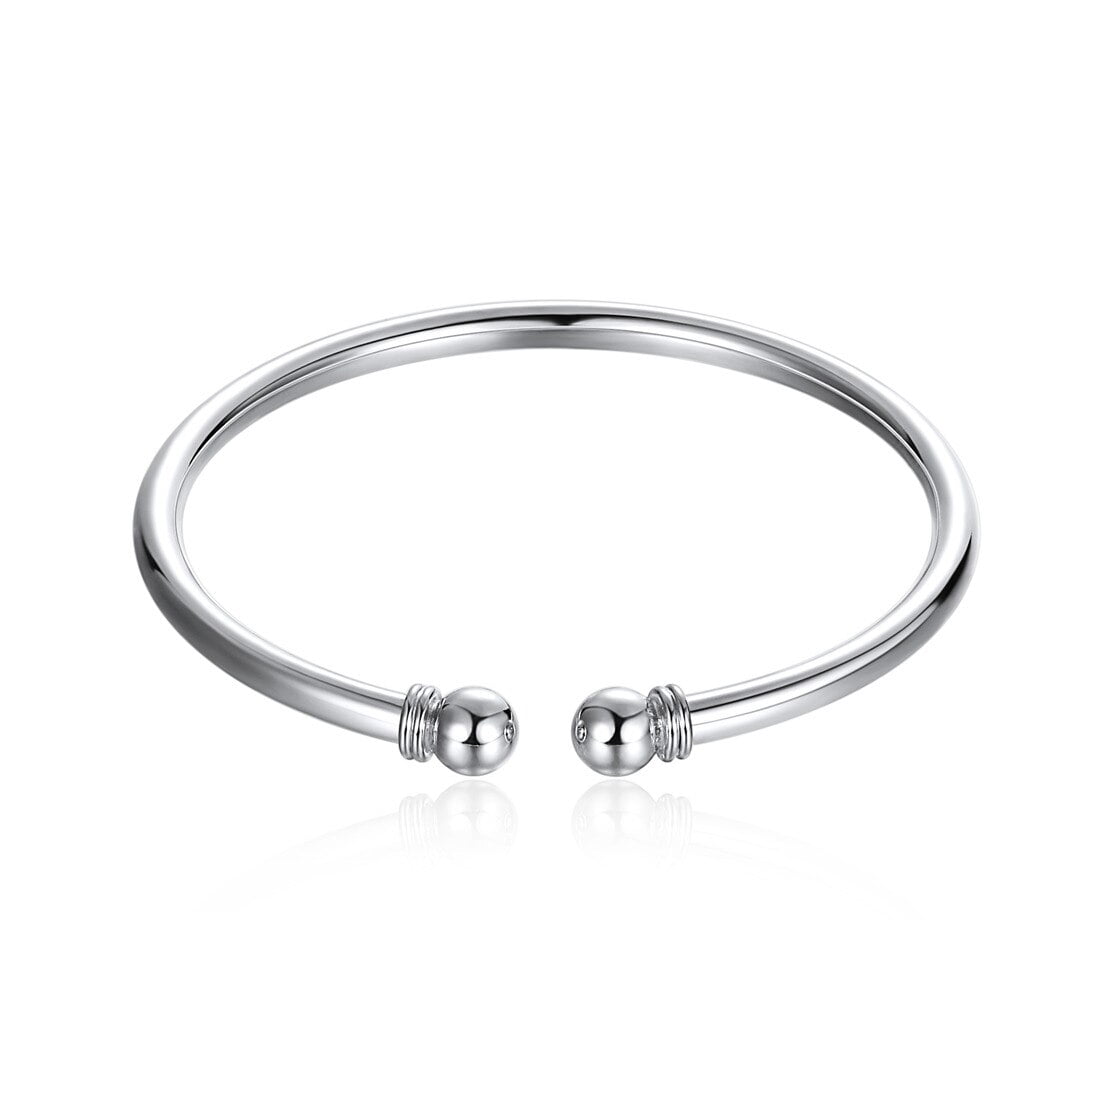 ChicSilver Women's 925 Solid Sterling Silver Polished Round Ball Cuff  Bangle Open Bracelet